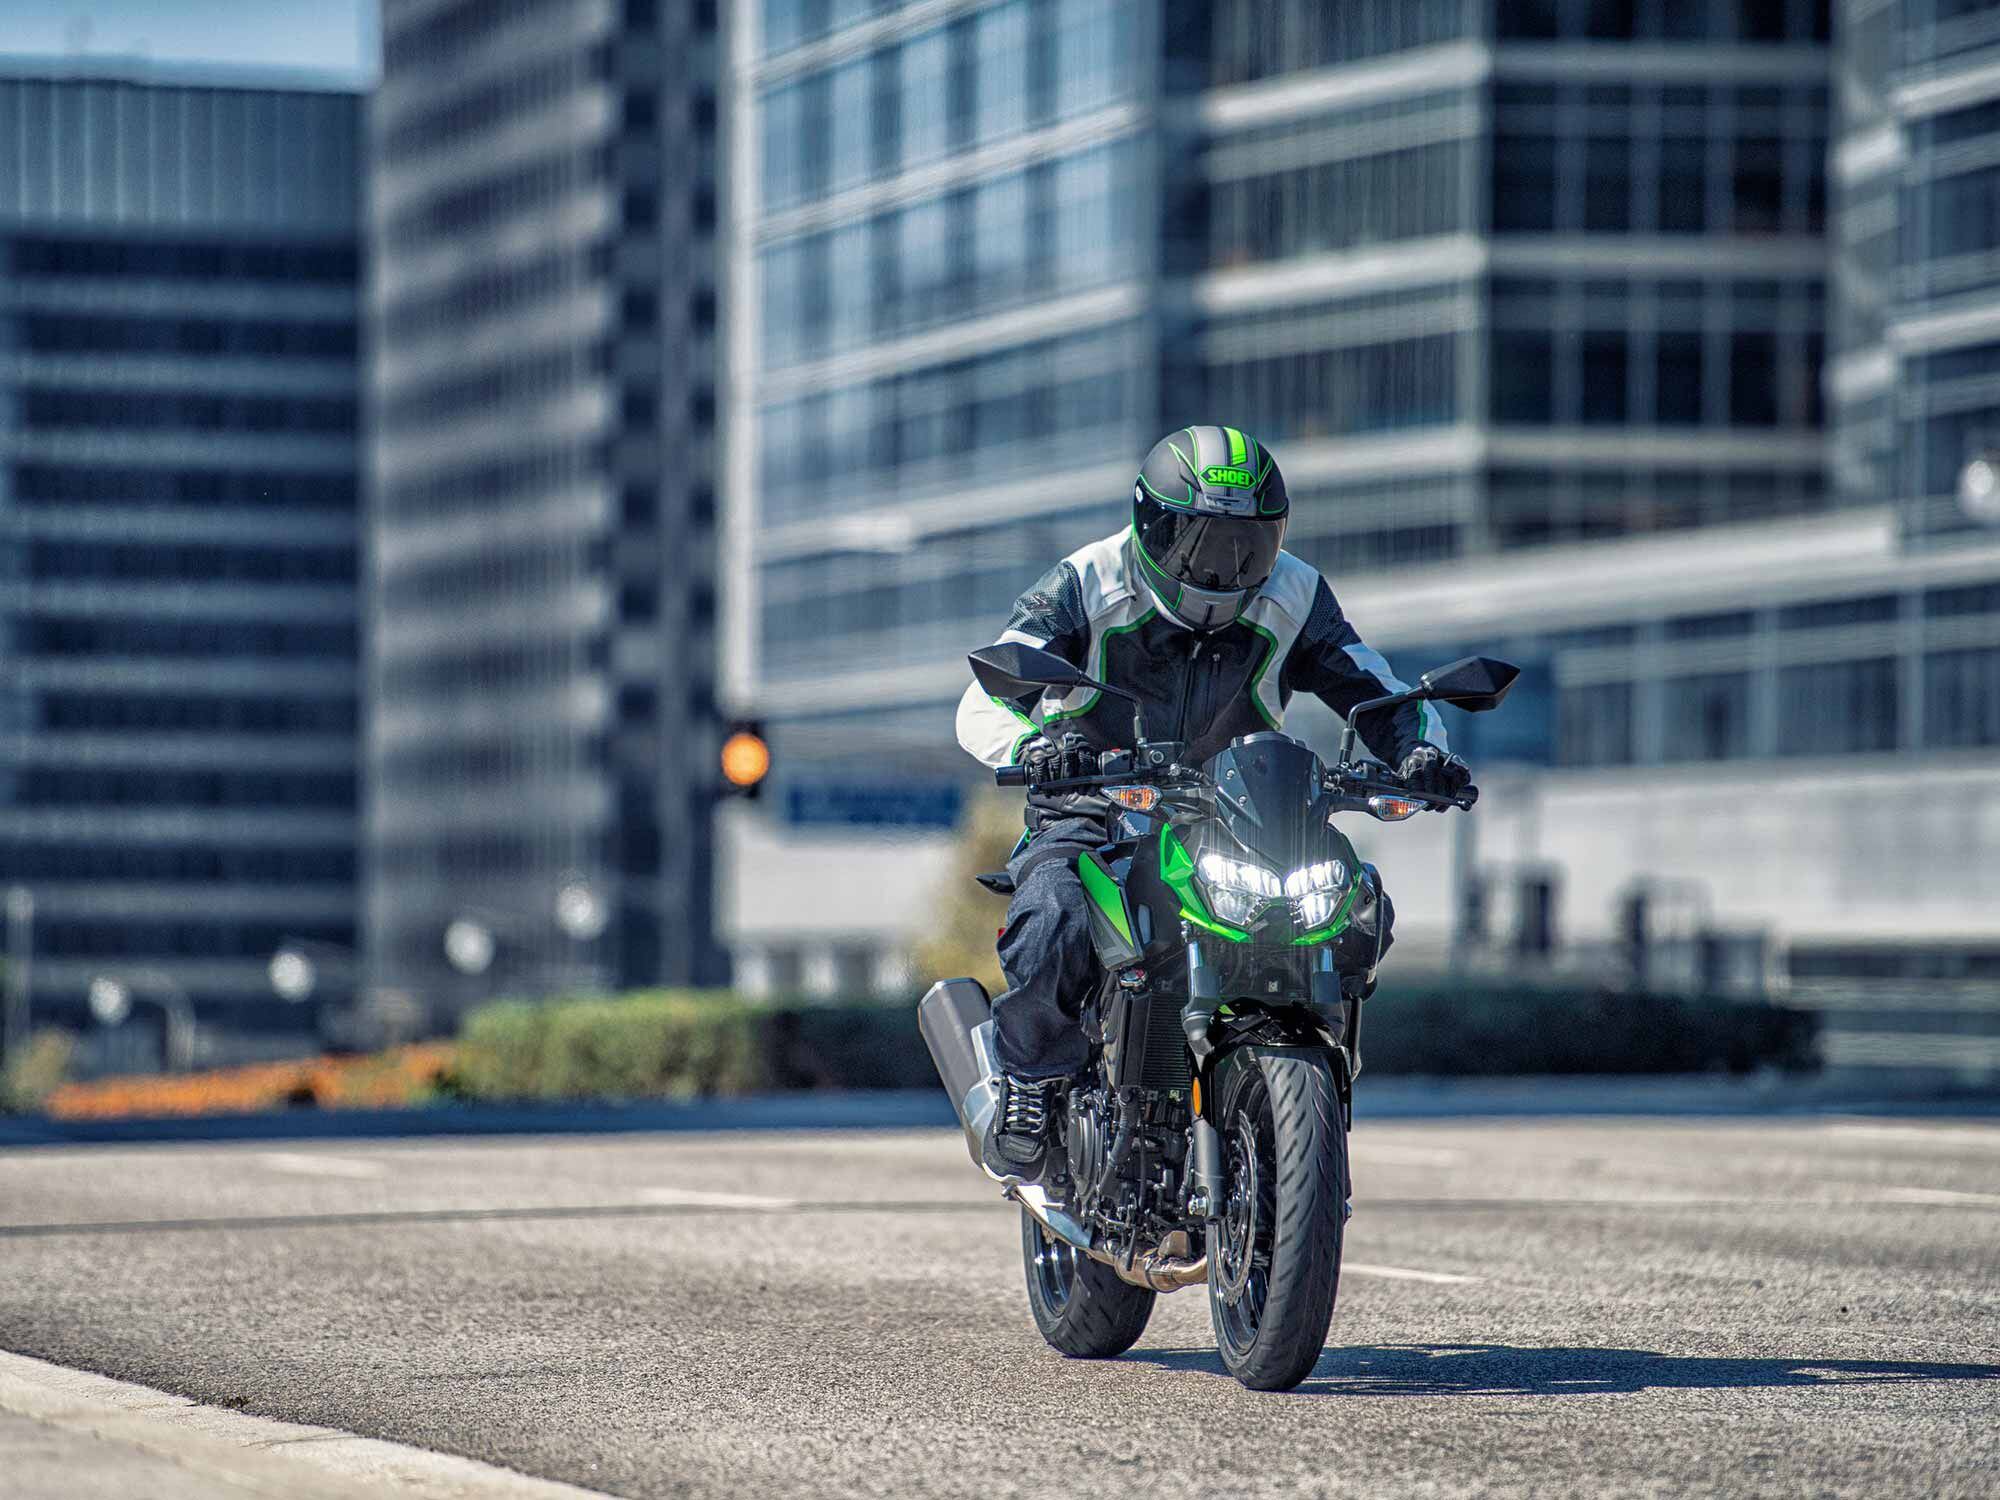 Aggressive in style, but not so aggressive in ergonomics. On the Z, riders will have a more upright riding posture than if they opted for the Ninja 400.